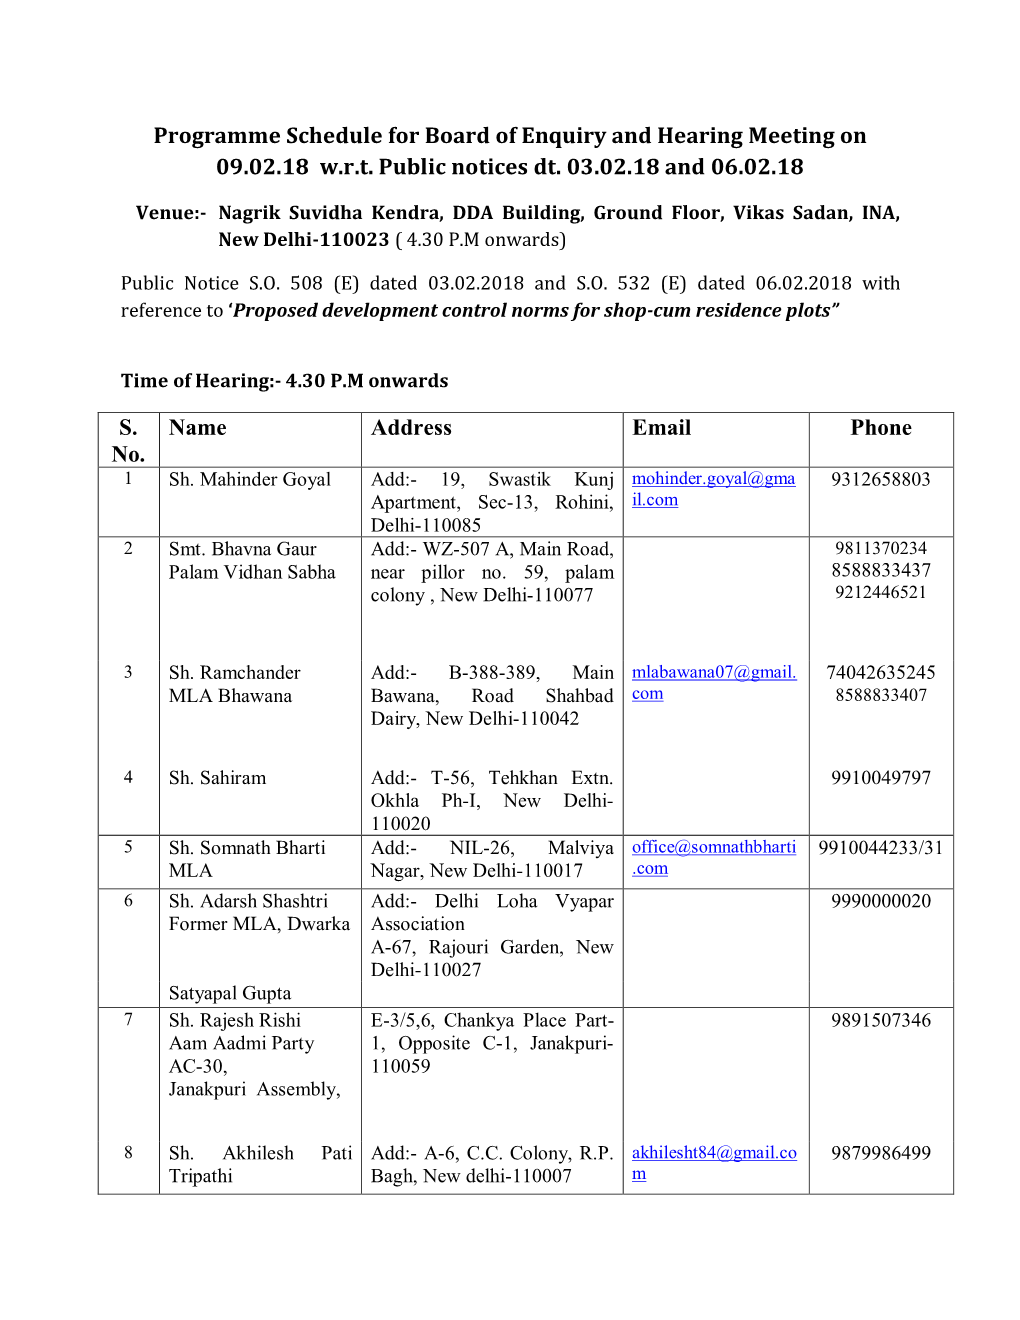 Programme Schedule for Board of Enquiry and Hearing Meeting on 09.02.18 W.R.T